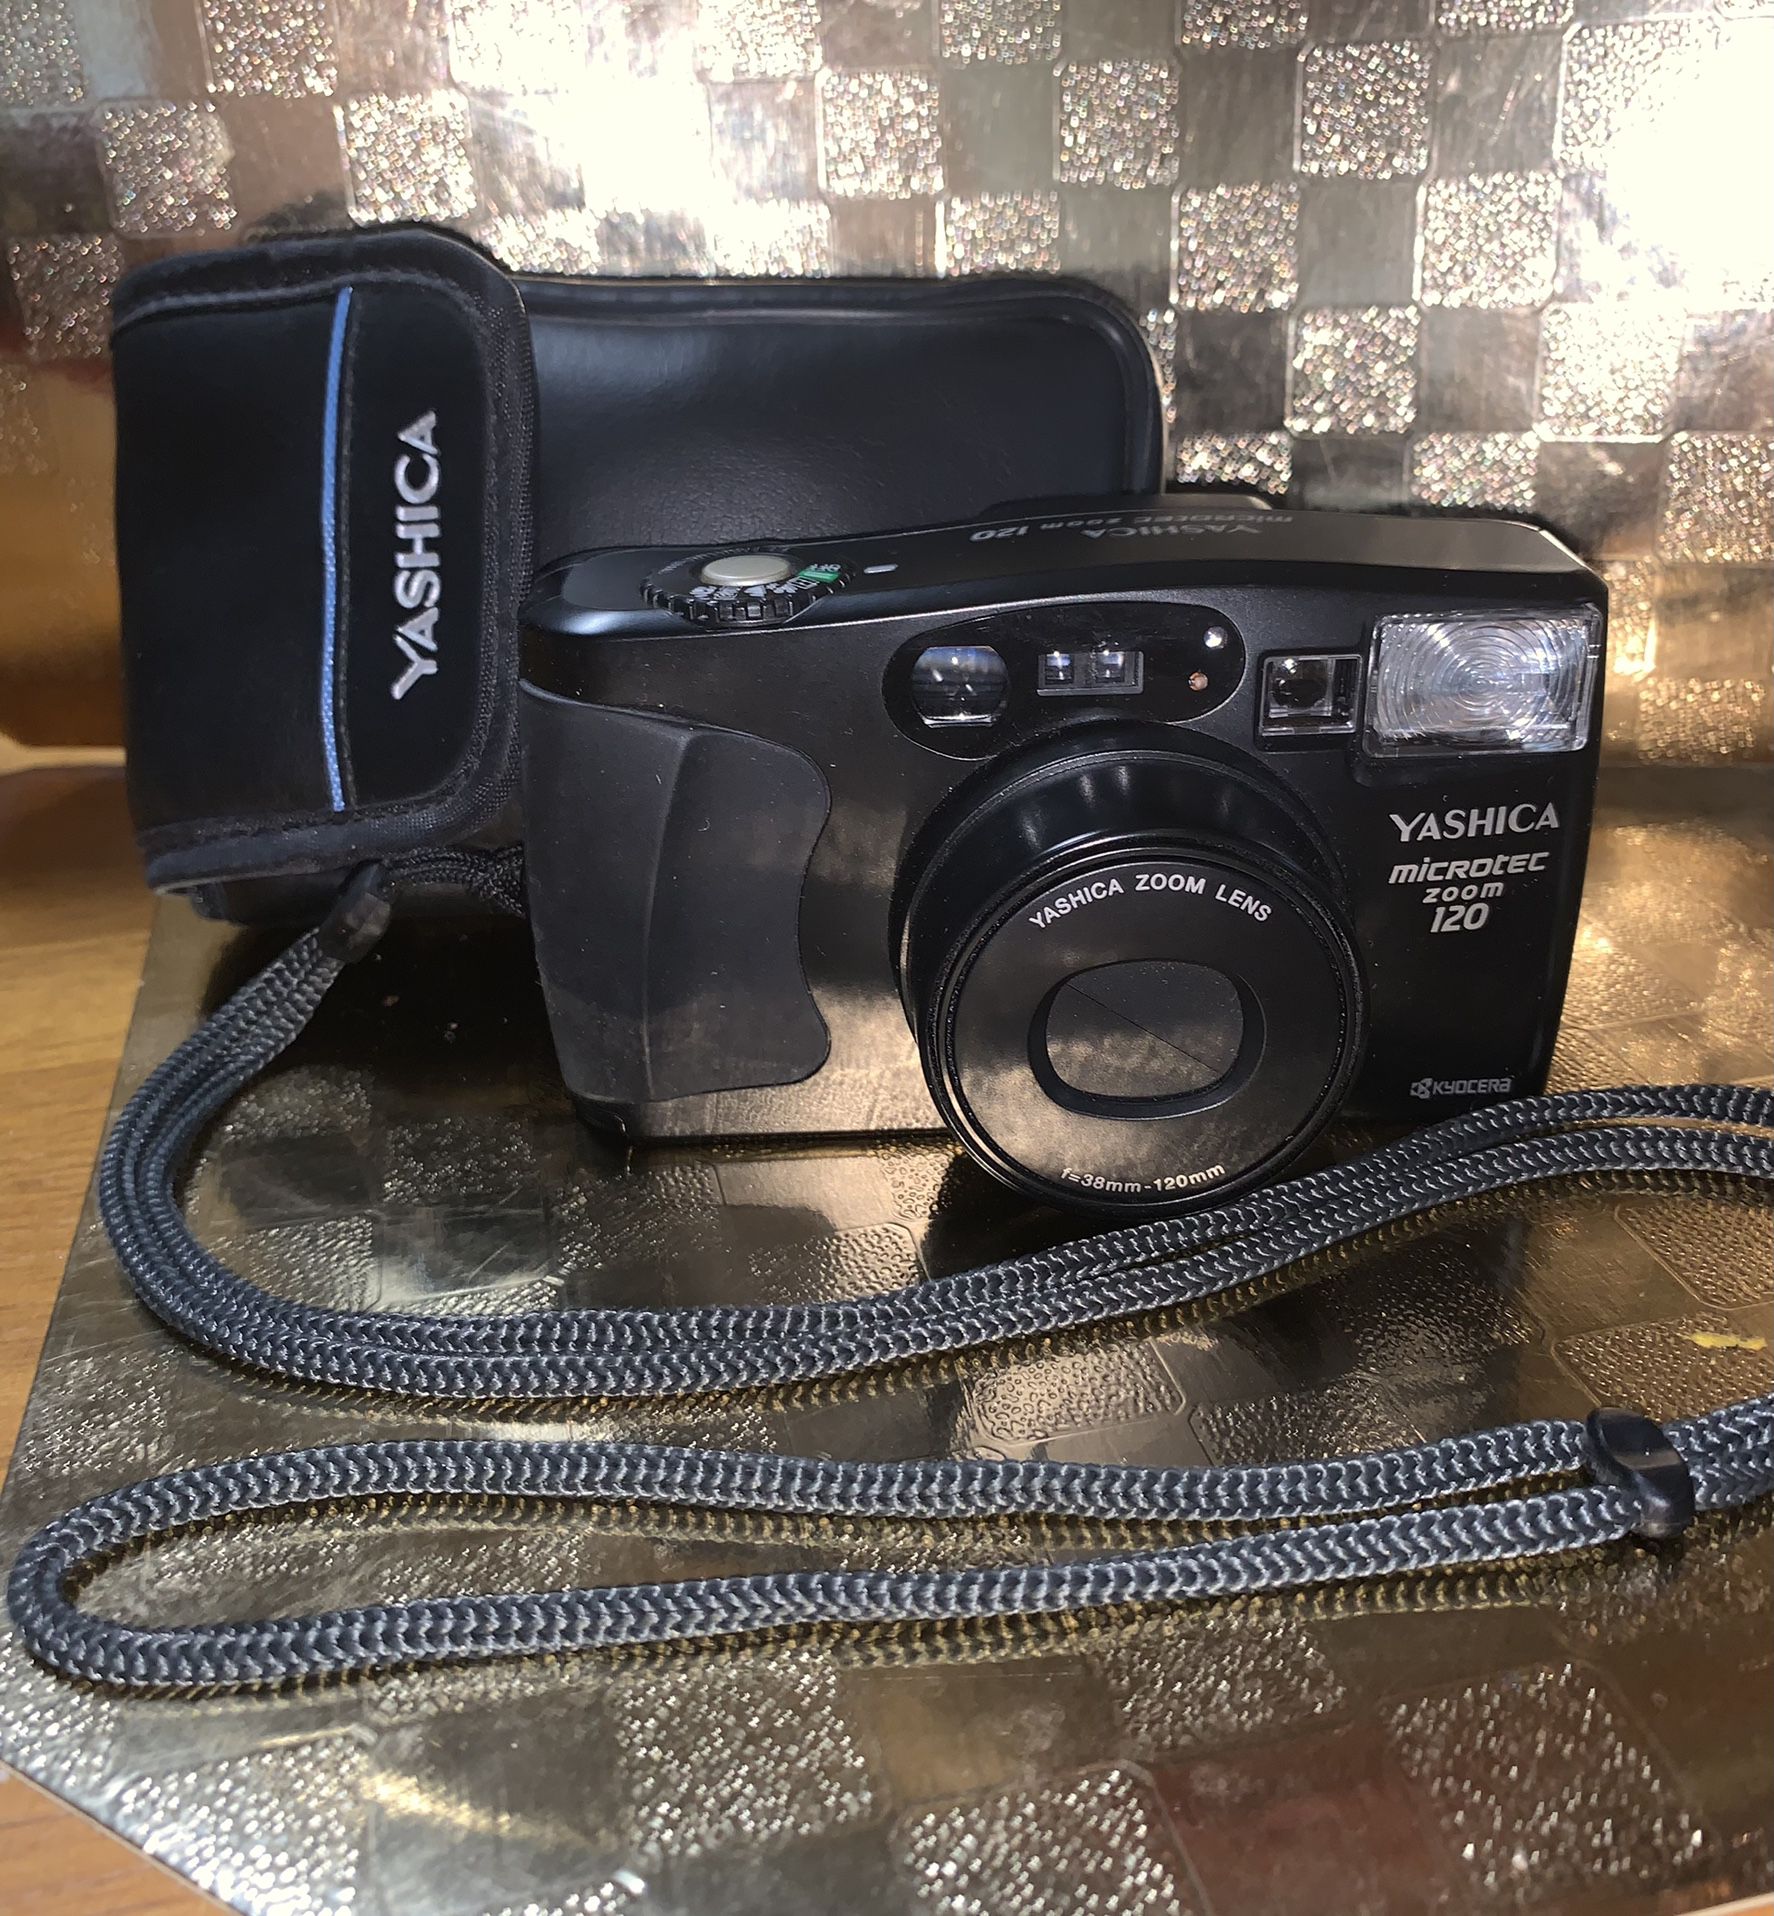 YASHICA MICROTEC ZOOM 120 POINT & SHOOT AUTO FOCUS  CAMERA - SIMILAR ONES ON LINE SELLING OVER $140